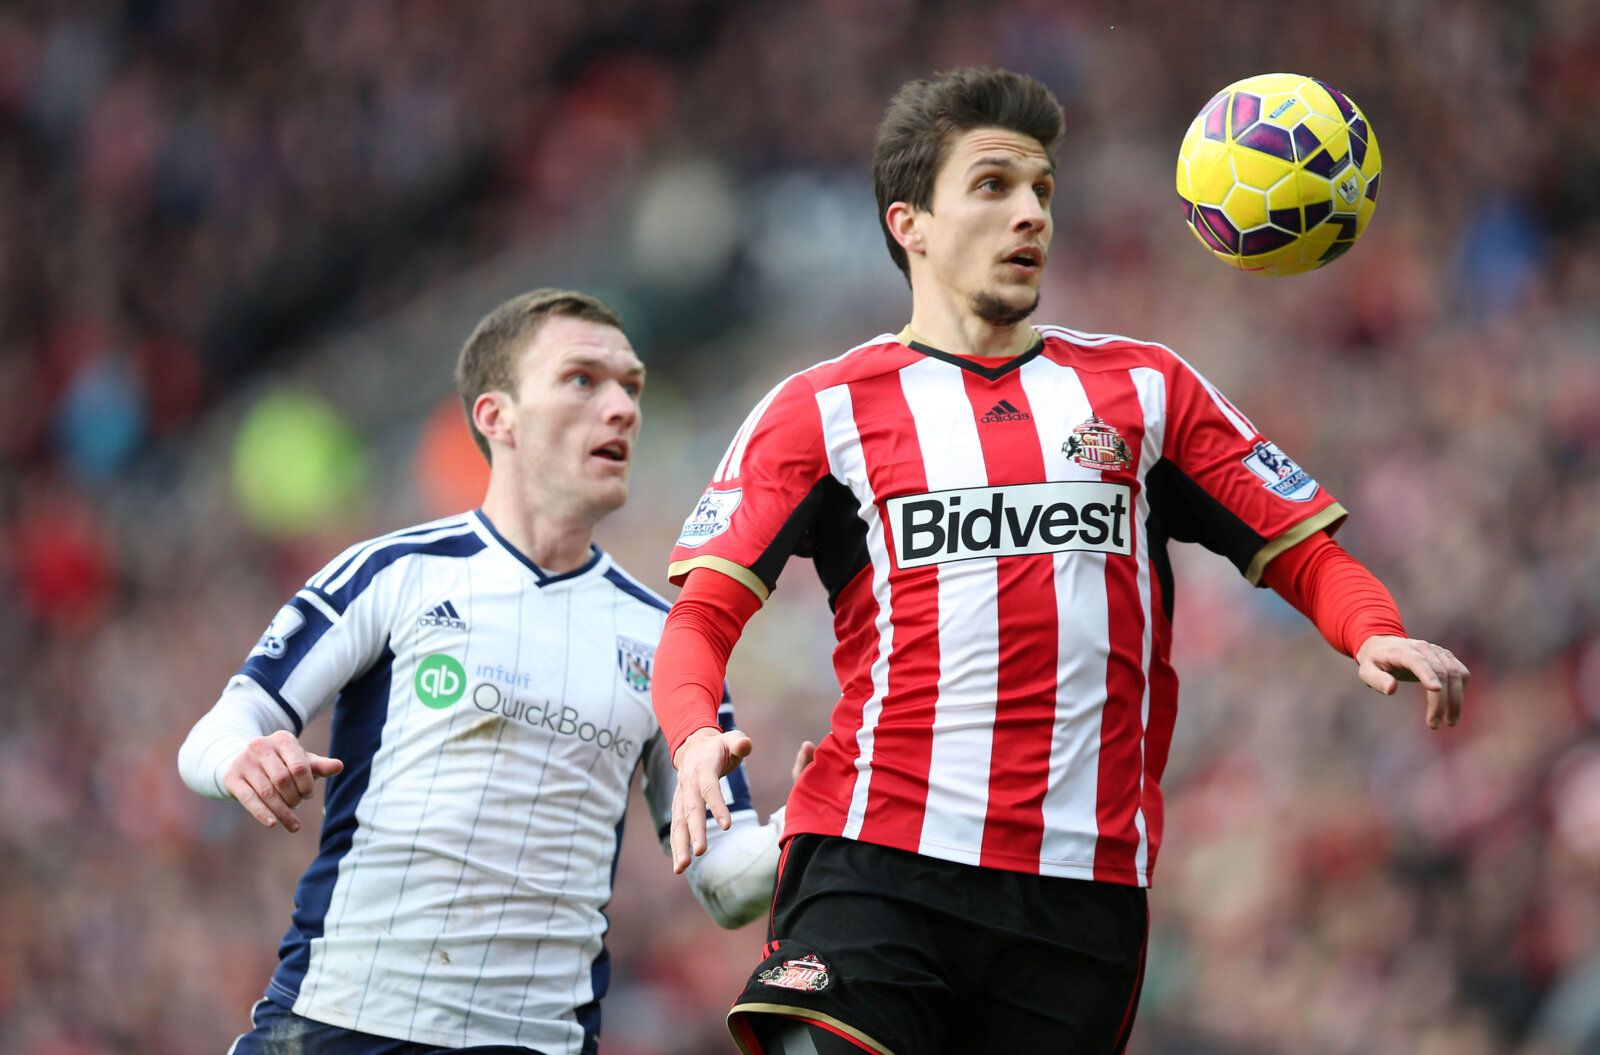 Football - Sunderland v West Bromwich Albion - Barclays Premier League - The Stadium of Light - 21/2/15 
Santiago Vergini of Sunderland in action with Craig Gardner of West Bromwich Albion  
Mandatory Credit: Action Images / John Clifton 
Livepic 
EDITORIAL USE ONLY. No use with unauthorized audio, video, data, fixture lists, club/league logos or 